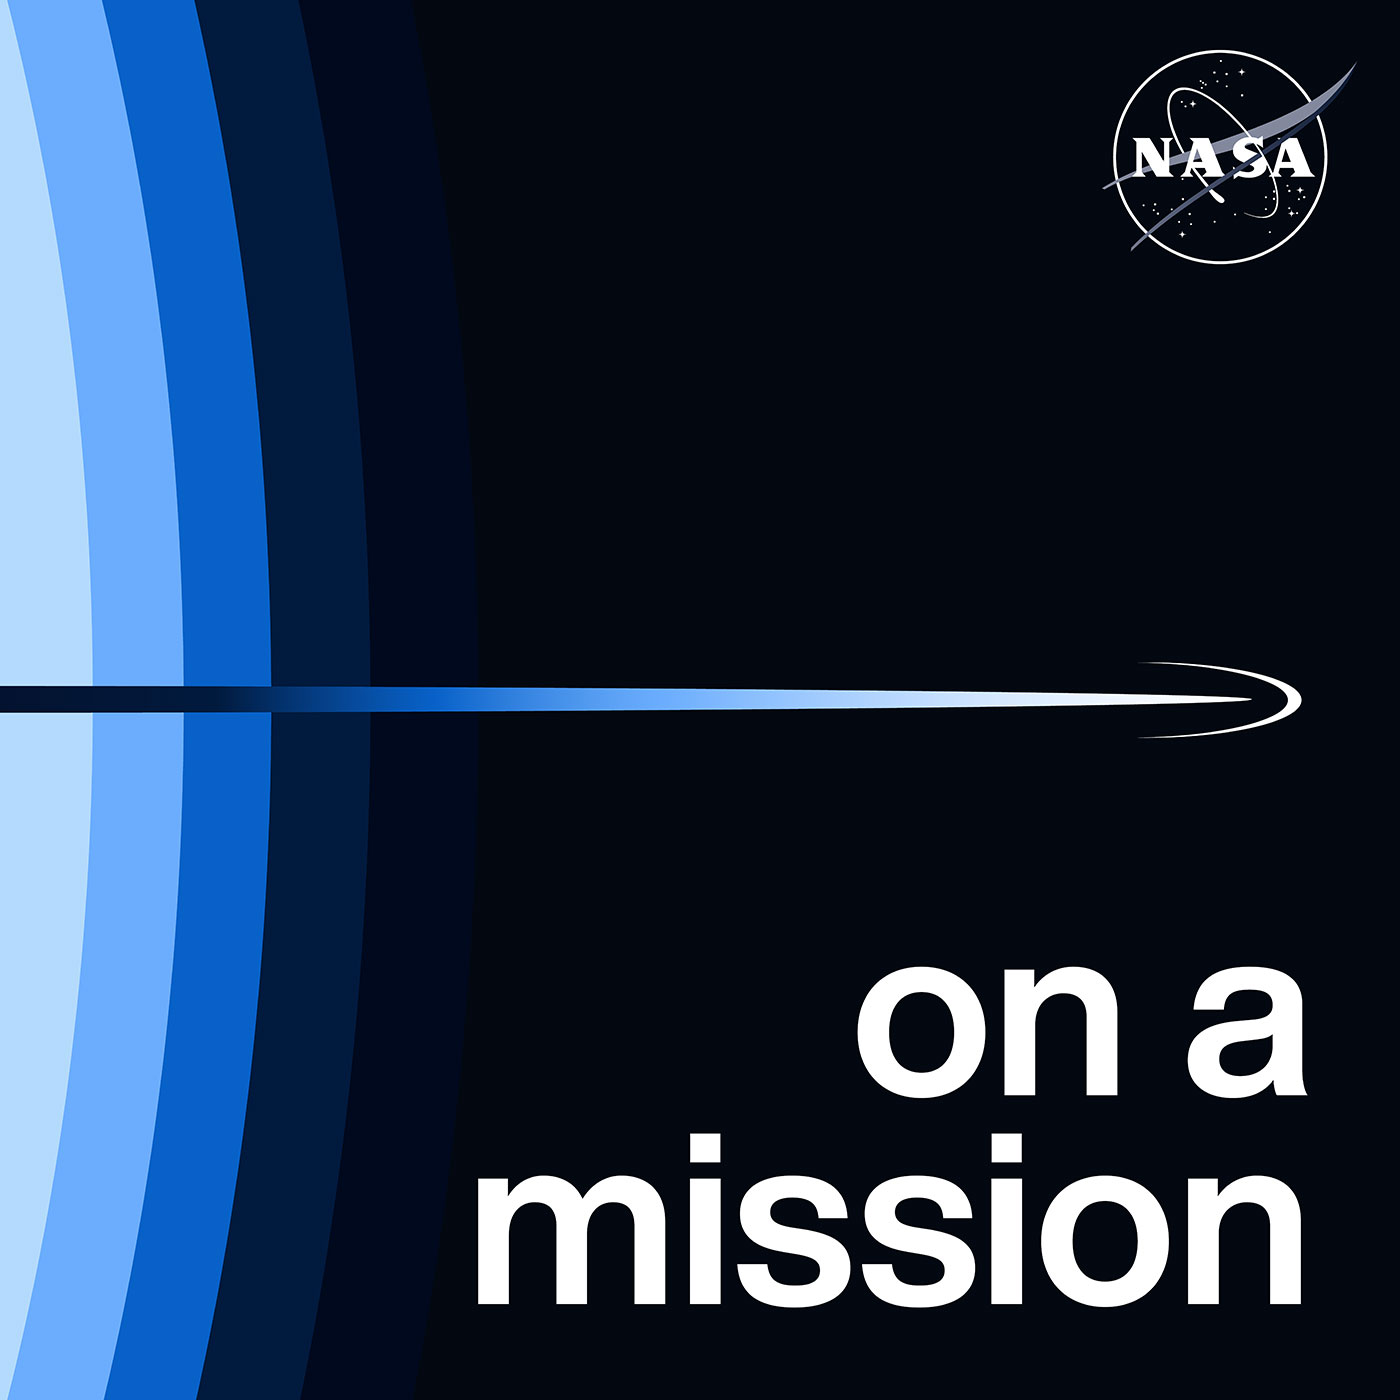 The cover art for the "On a Mission" podcast